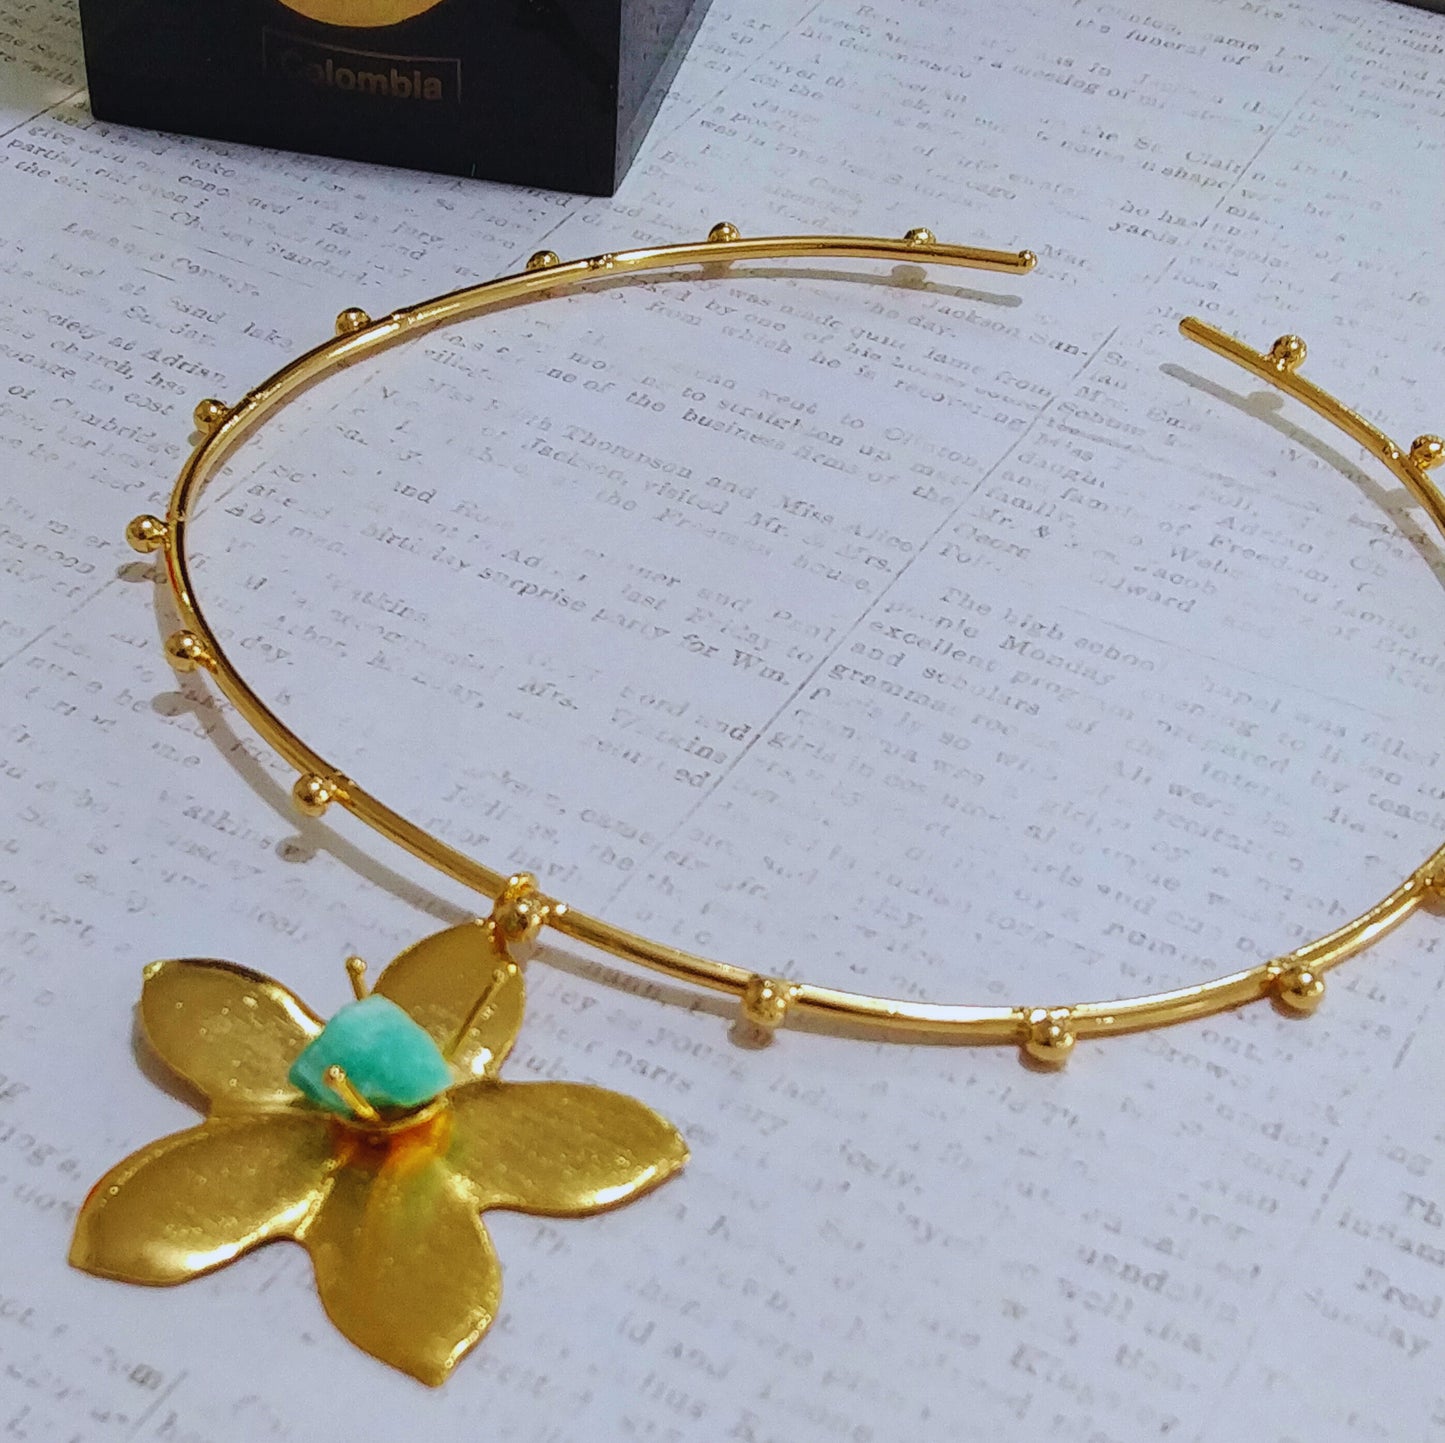 Choker with flower pendant with rustic emerald moralla in bronze with 24K gold plated